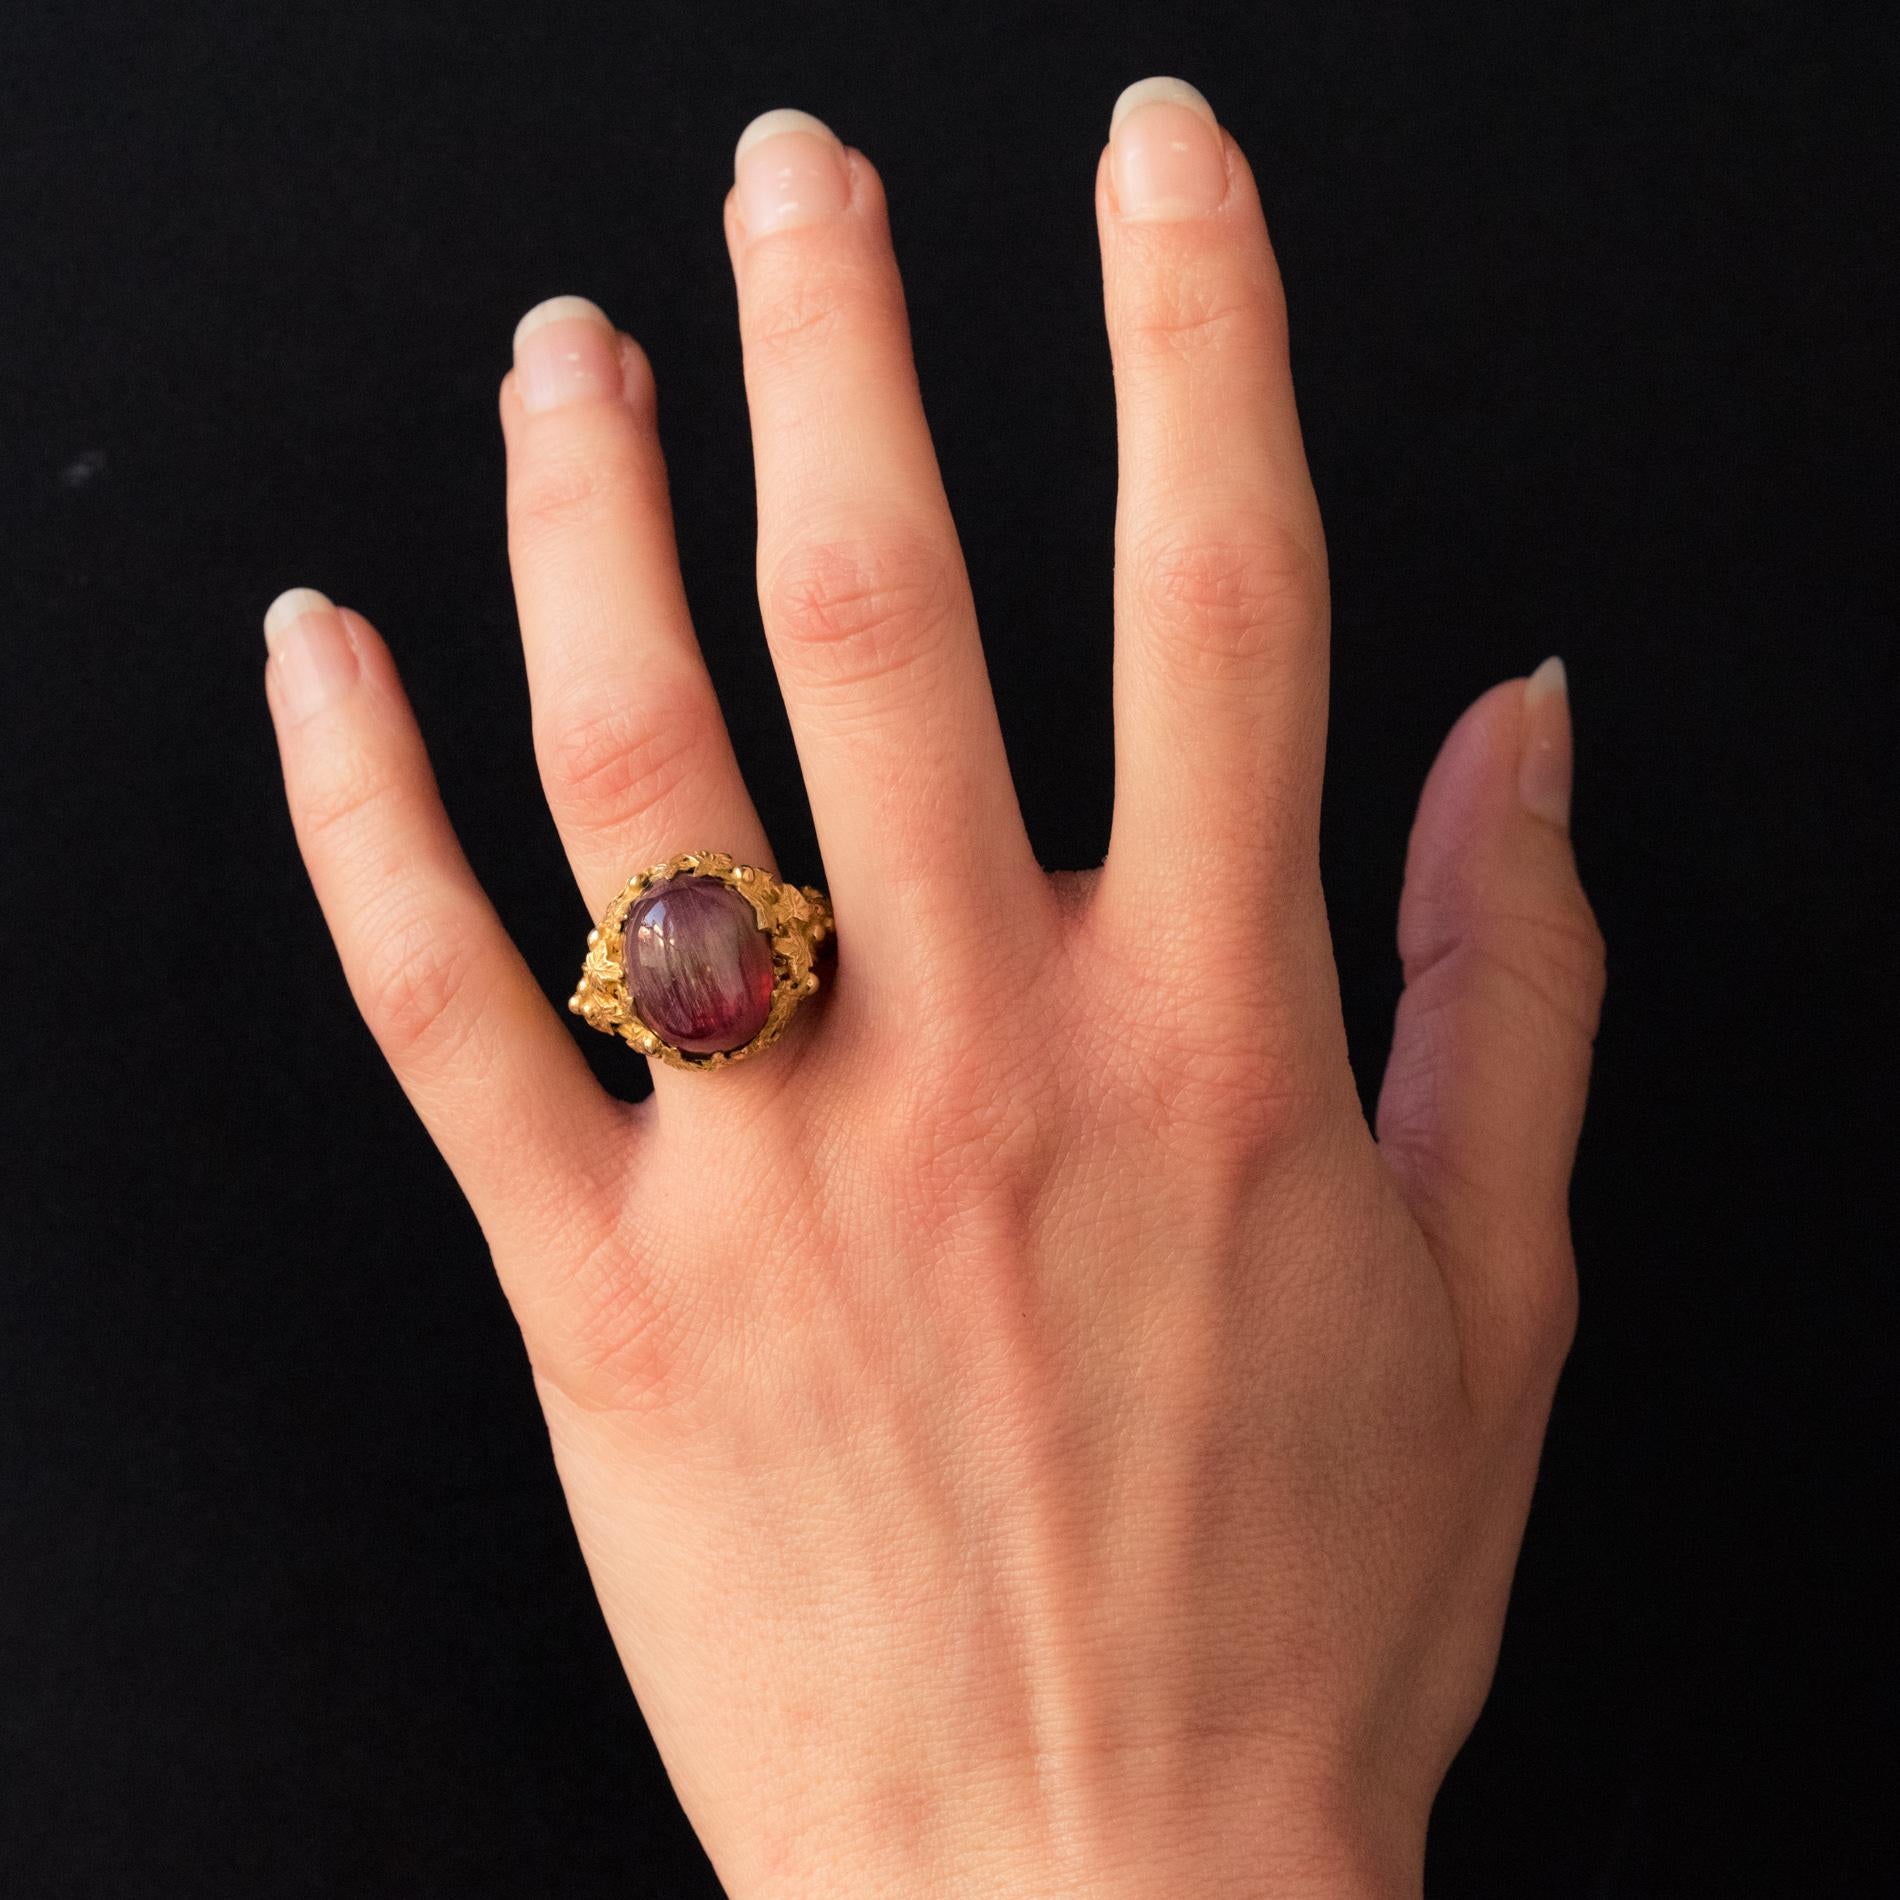 Baume creation - unique piece.
Ring in 18 karat yellow gold.
This ring is set with a beautiful raspberry watermelon tourmaline cabochon. The textured yellow gold ring band leads into entwined ivy branches, forming a delightful setting for the